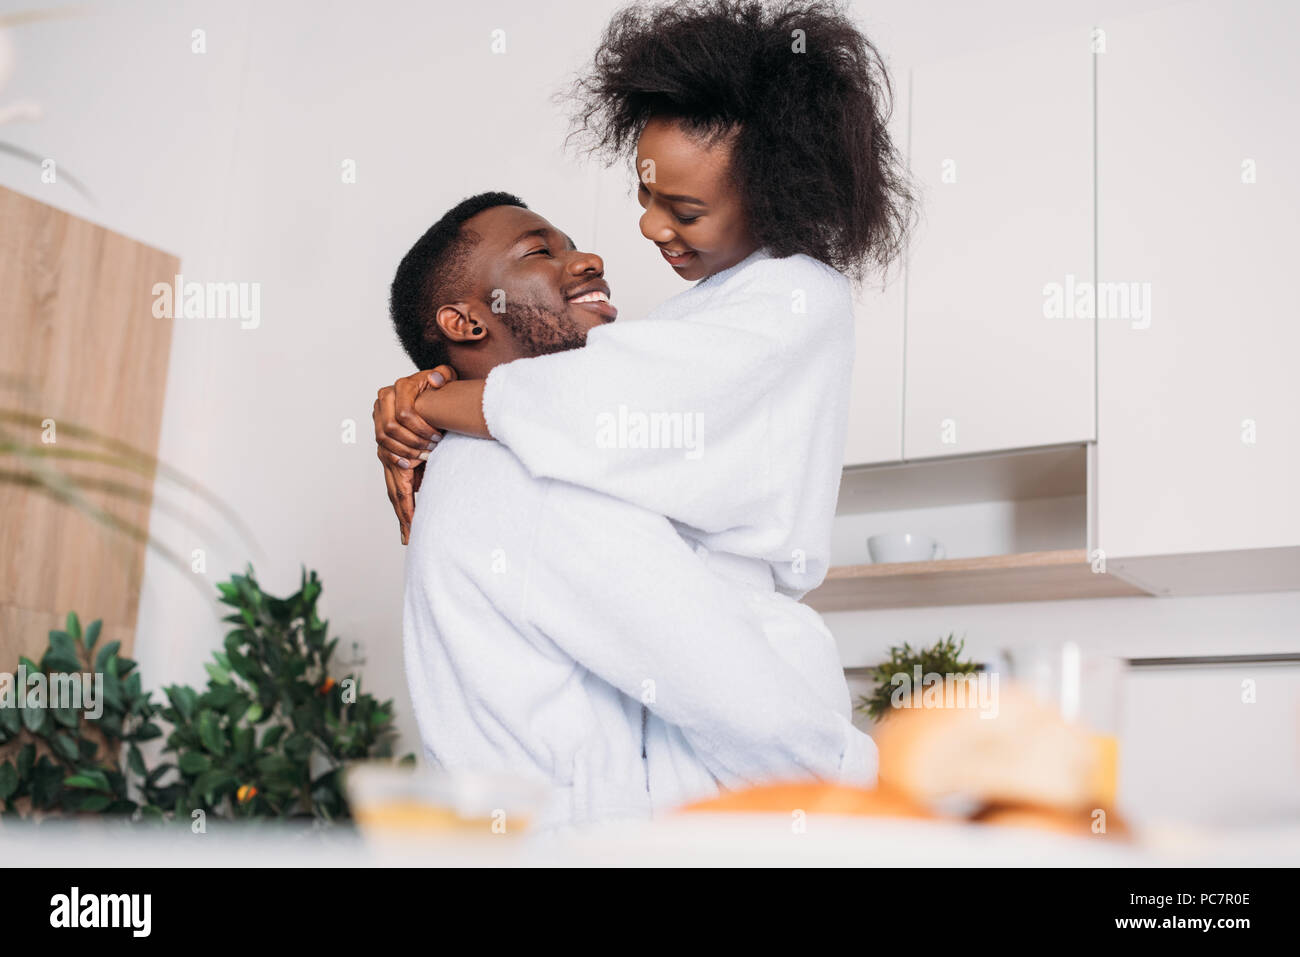 Low angle view of smiling african american couple in kitchen Stock Photo